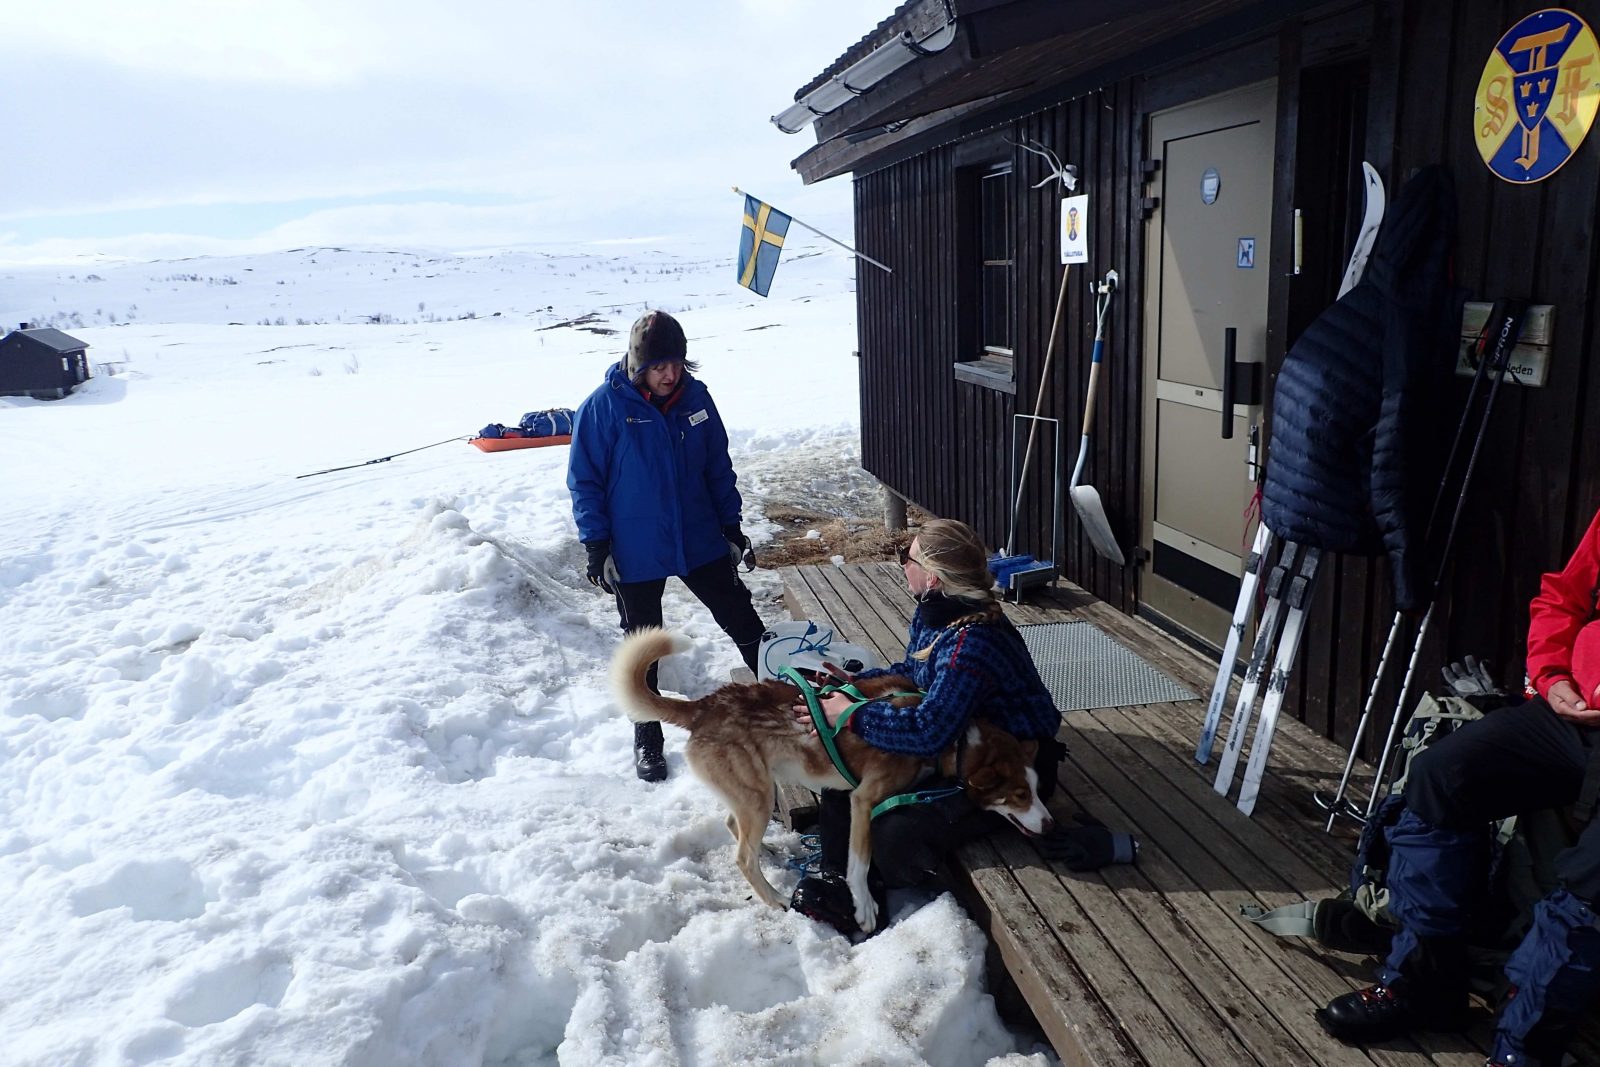 Hikers chat on the doorstep of a hut in the Norwegian Arctic; one cuddles a sled dog.